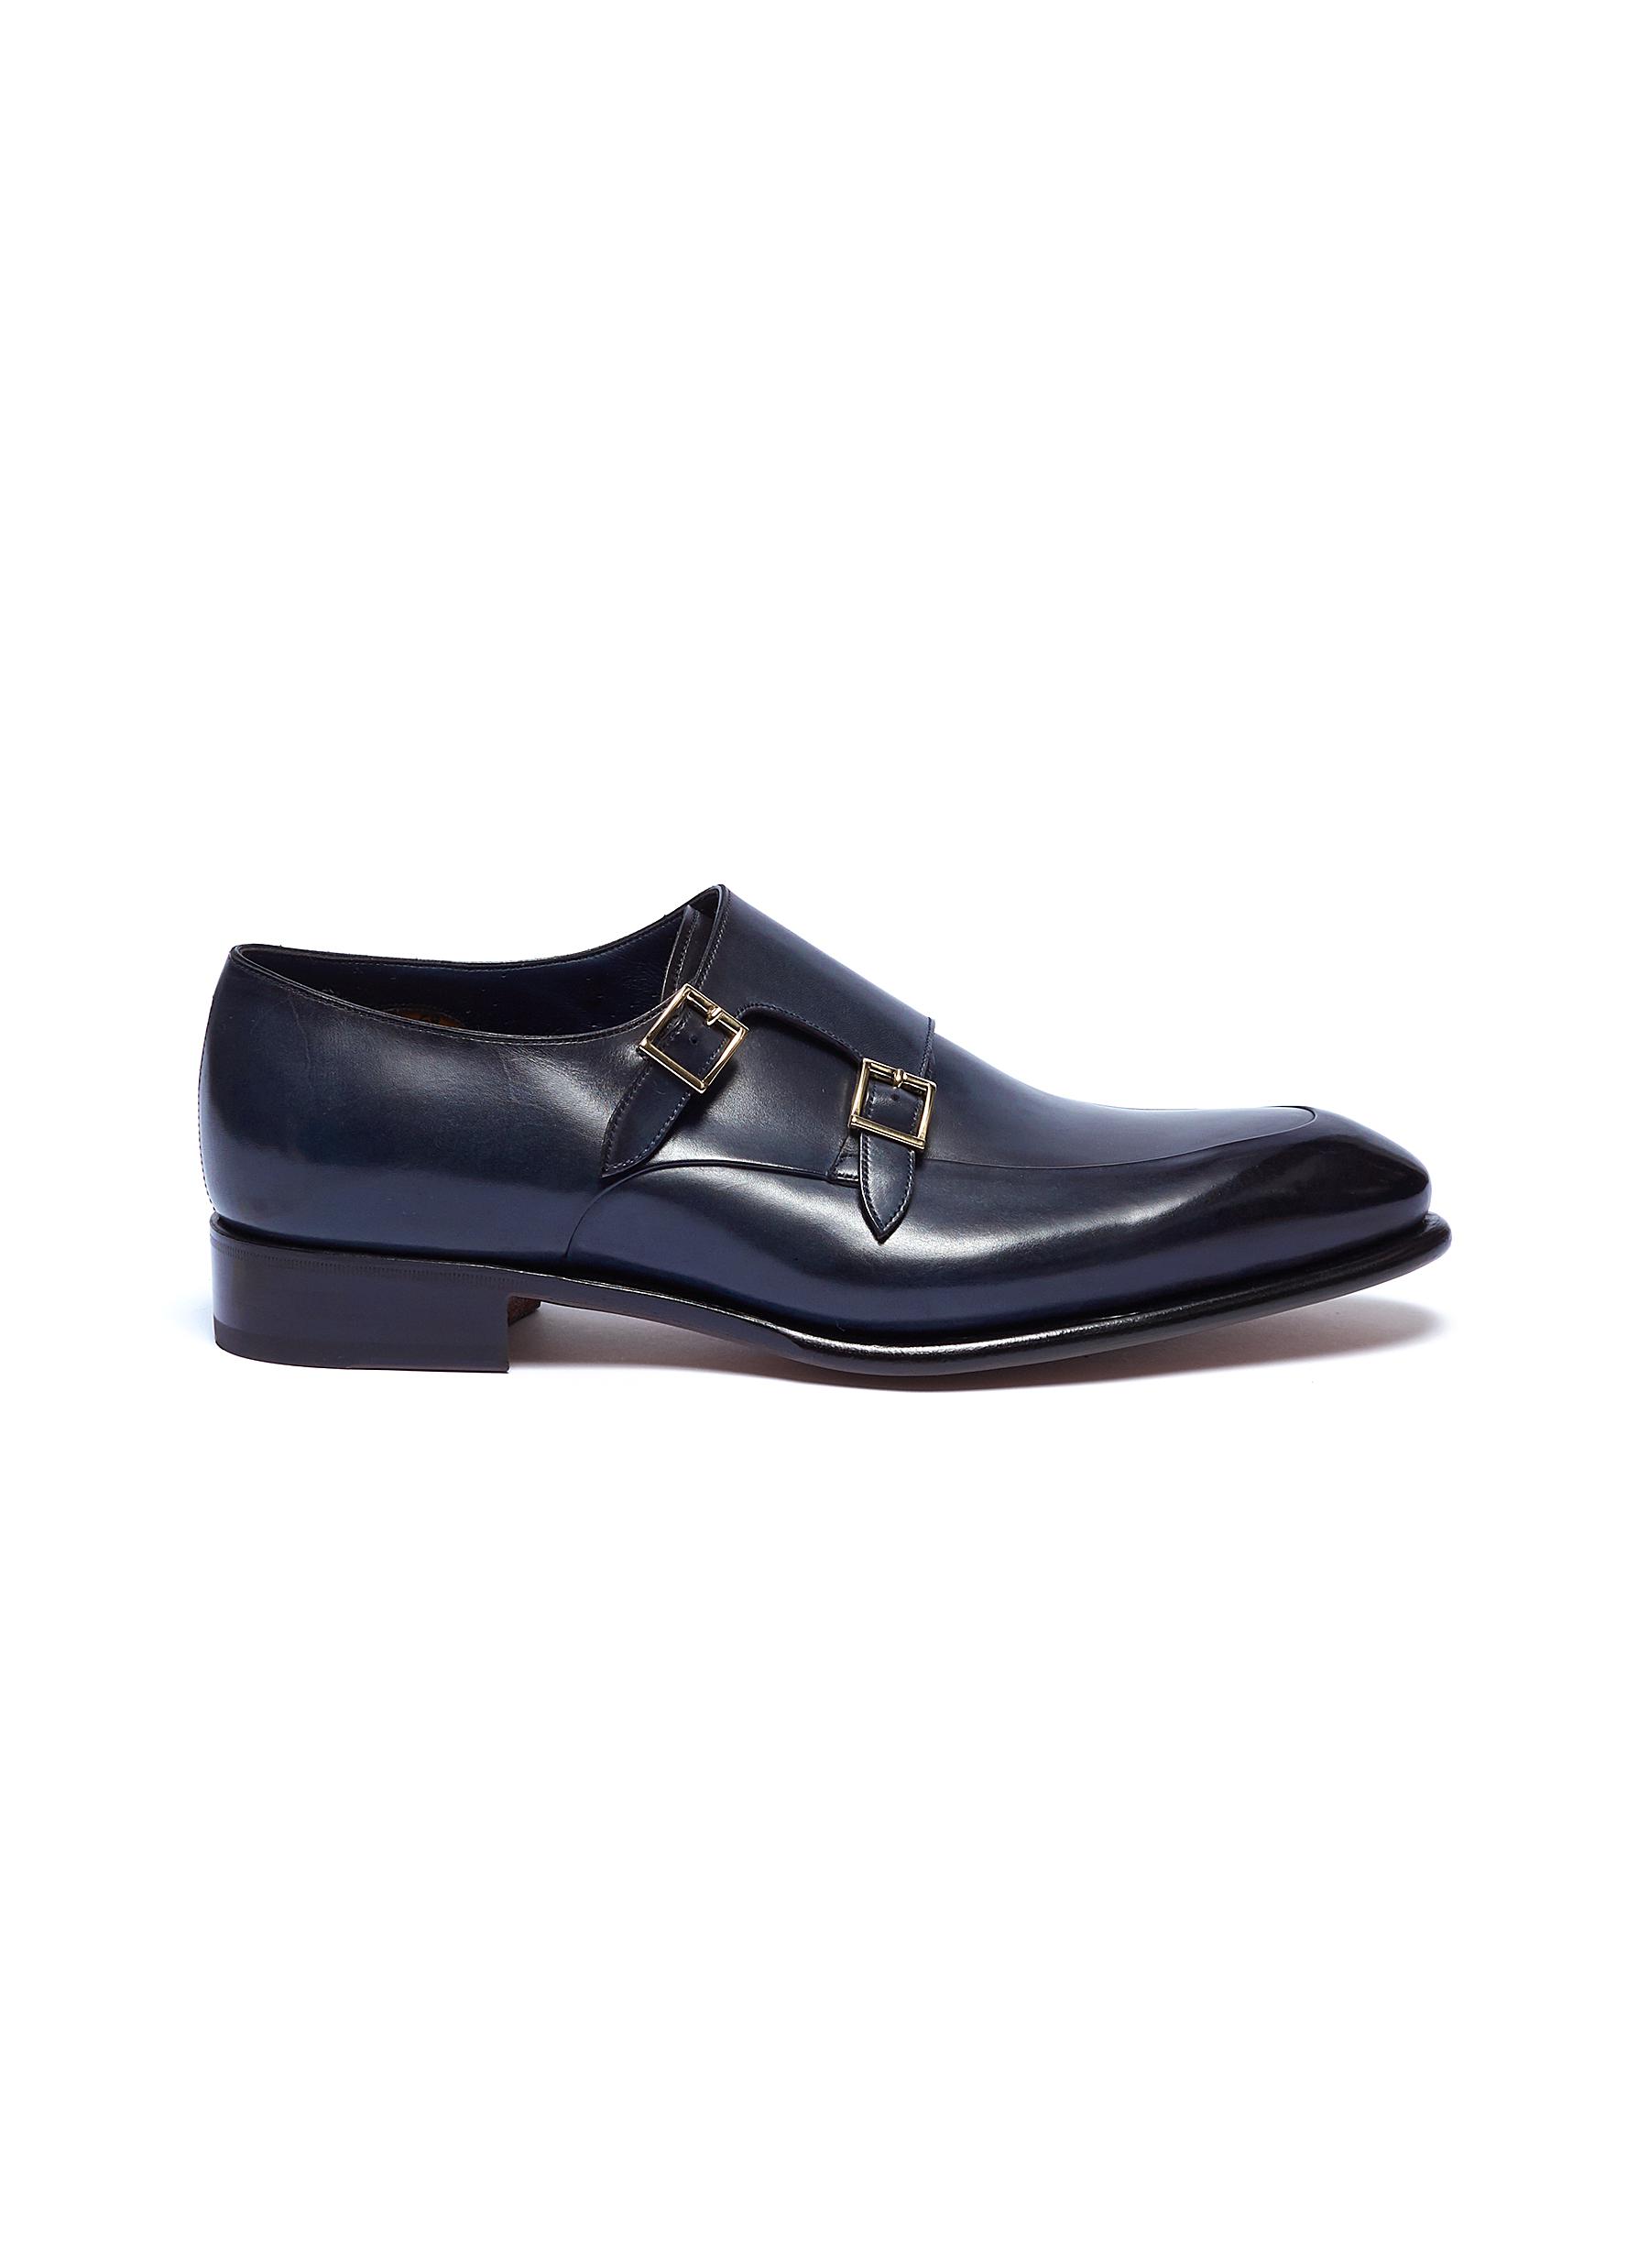 Santoni 'carter' Double Monk Strap Leather Loafers In Midnight Navy ...